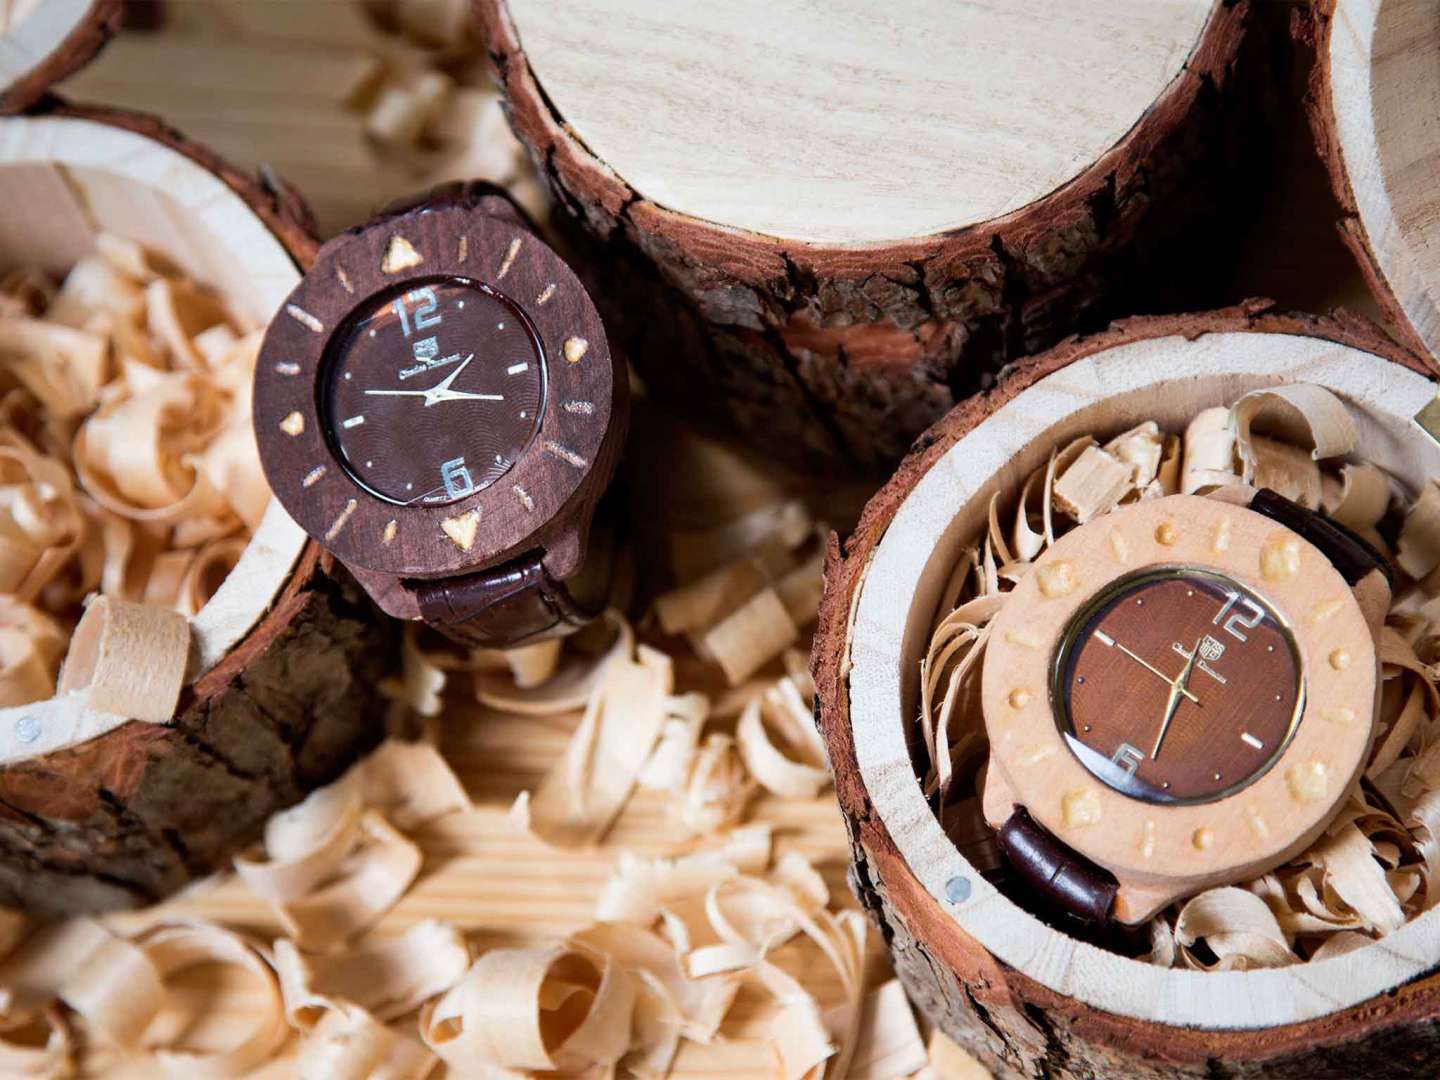 Pfeil Carving Tools: Promo Watches